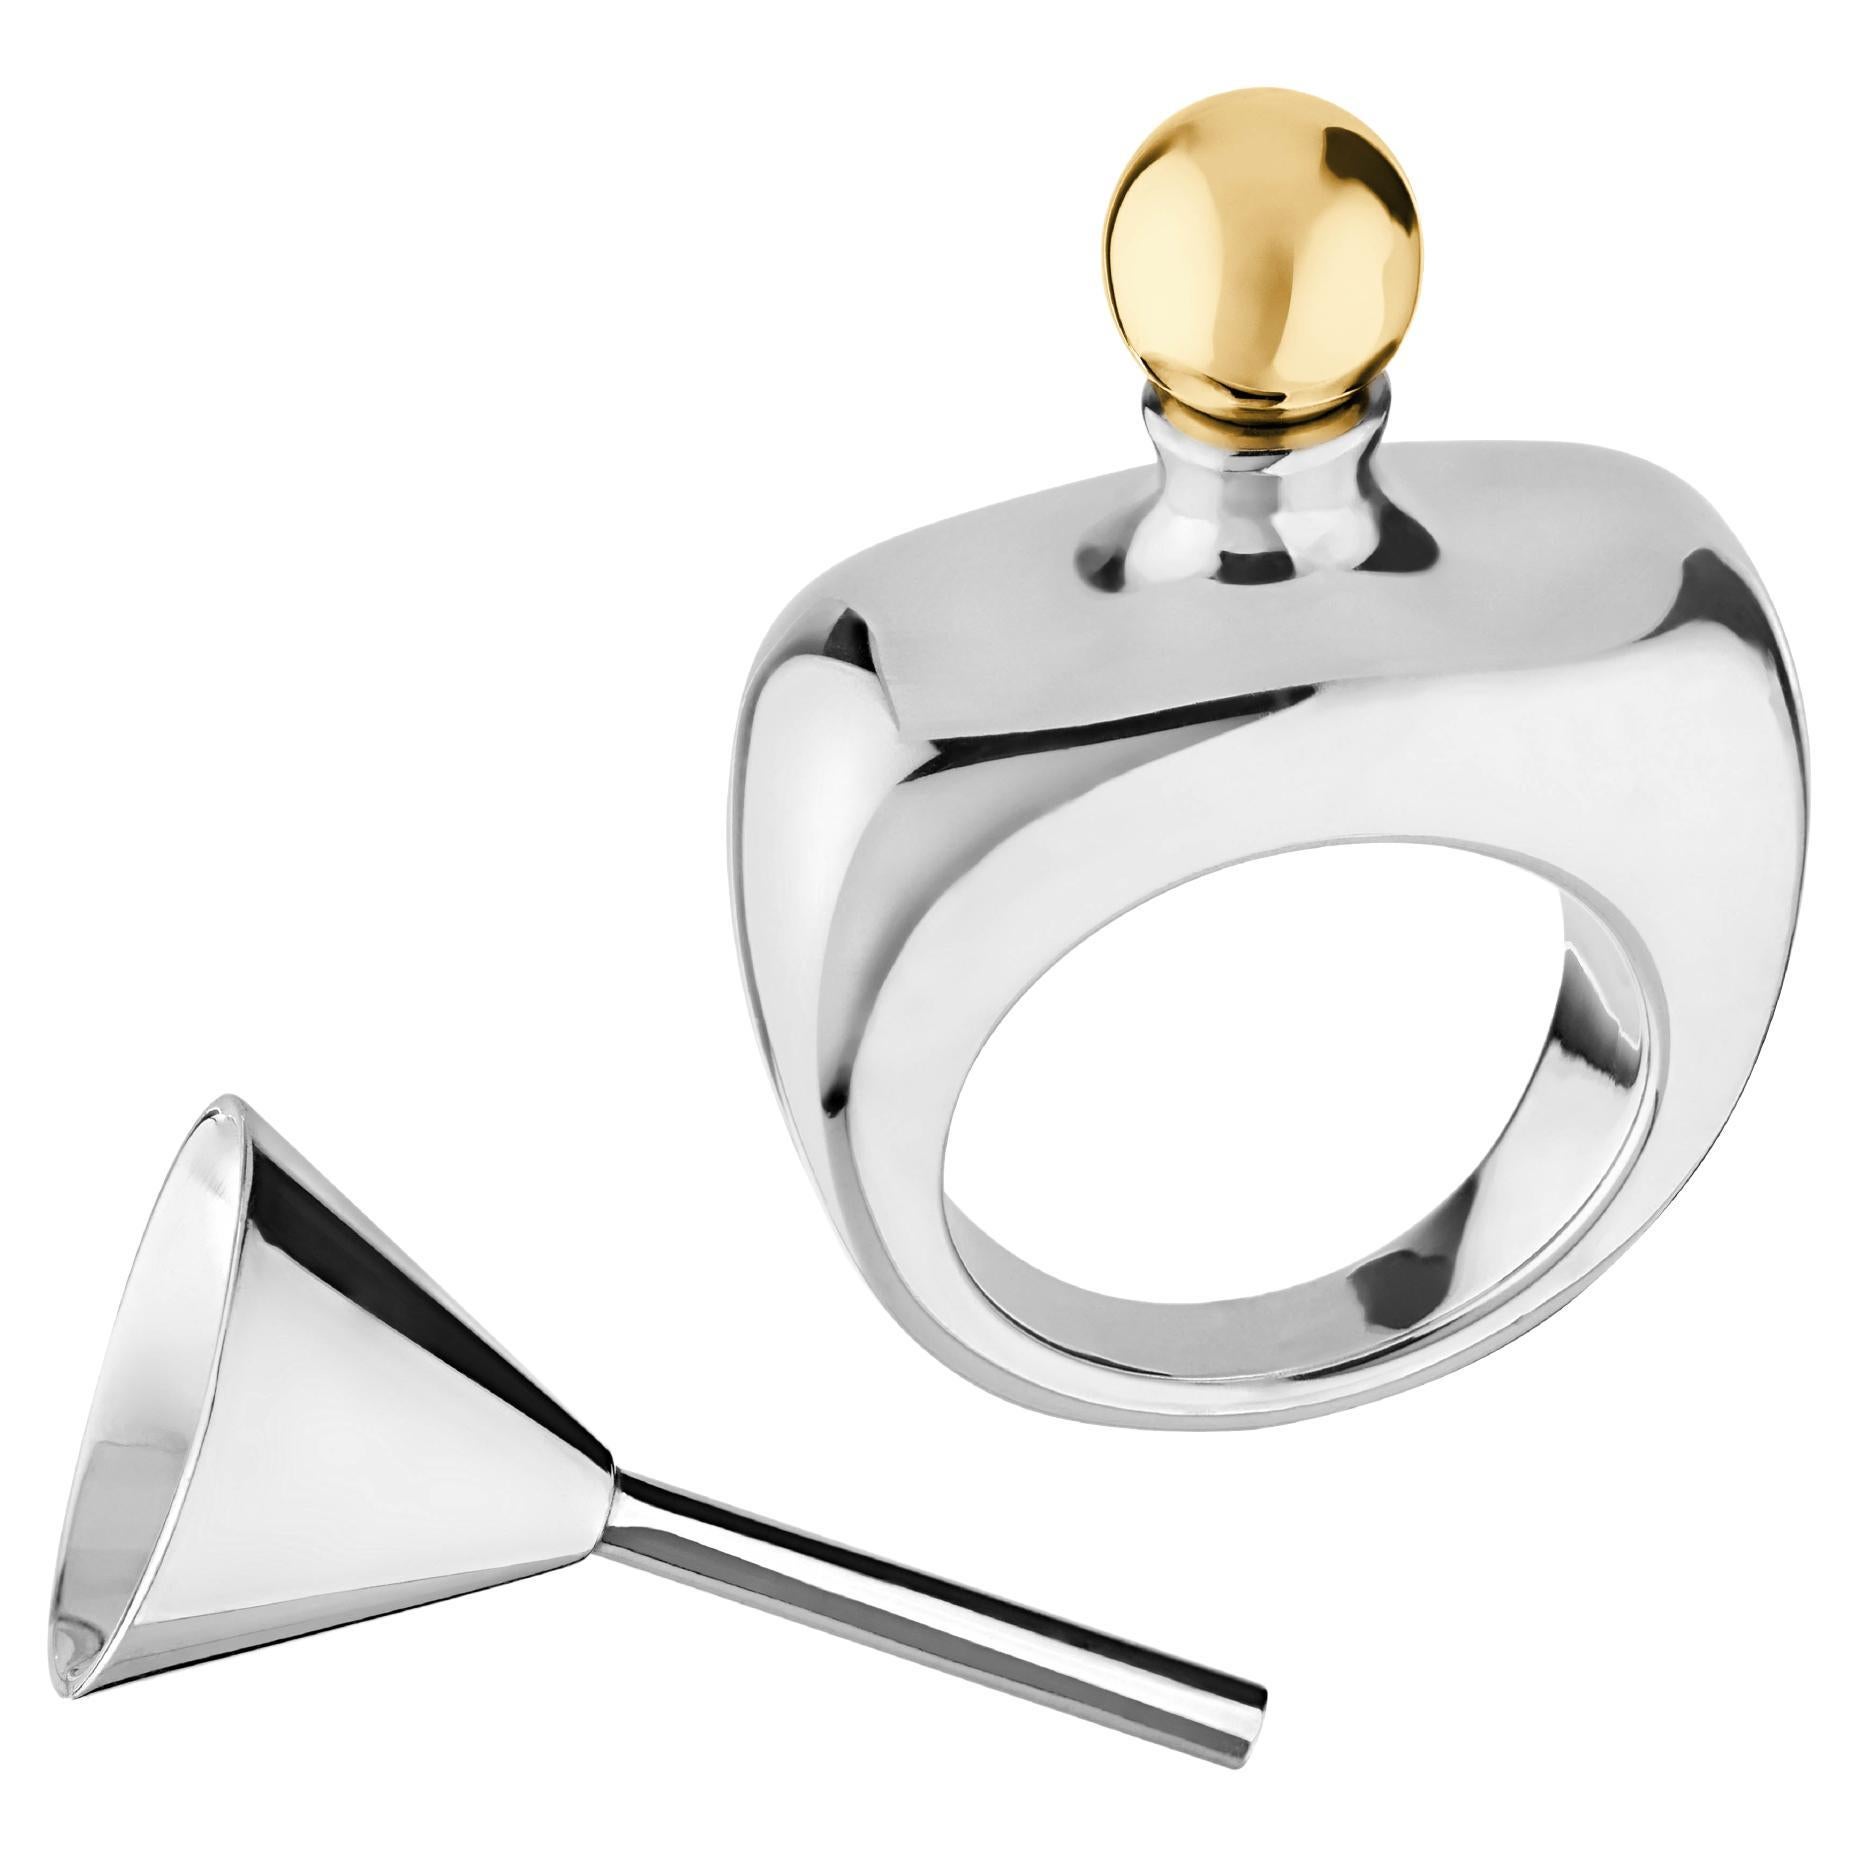 Betony Vernon "Essence Ring" Sterling Silver 925 with Funnel and Gold Cap For Sale